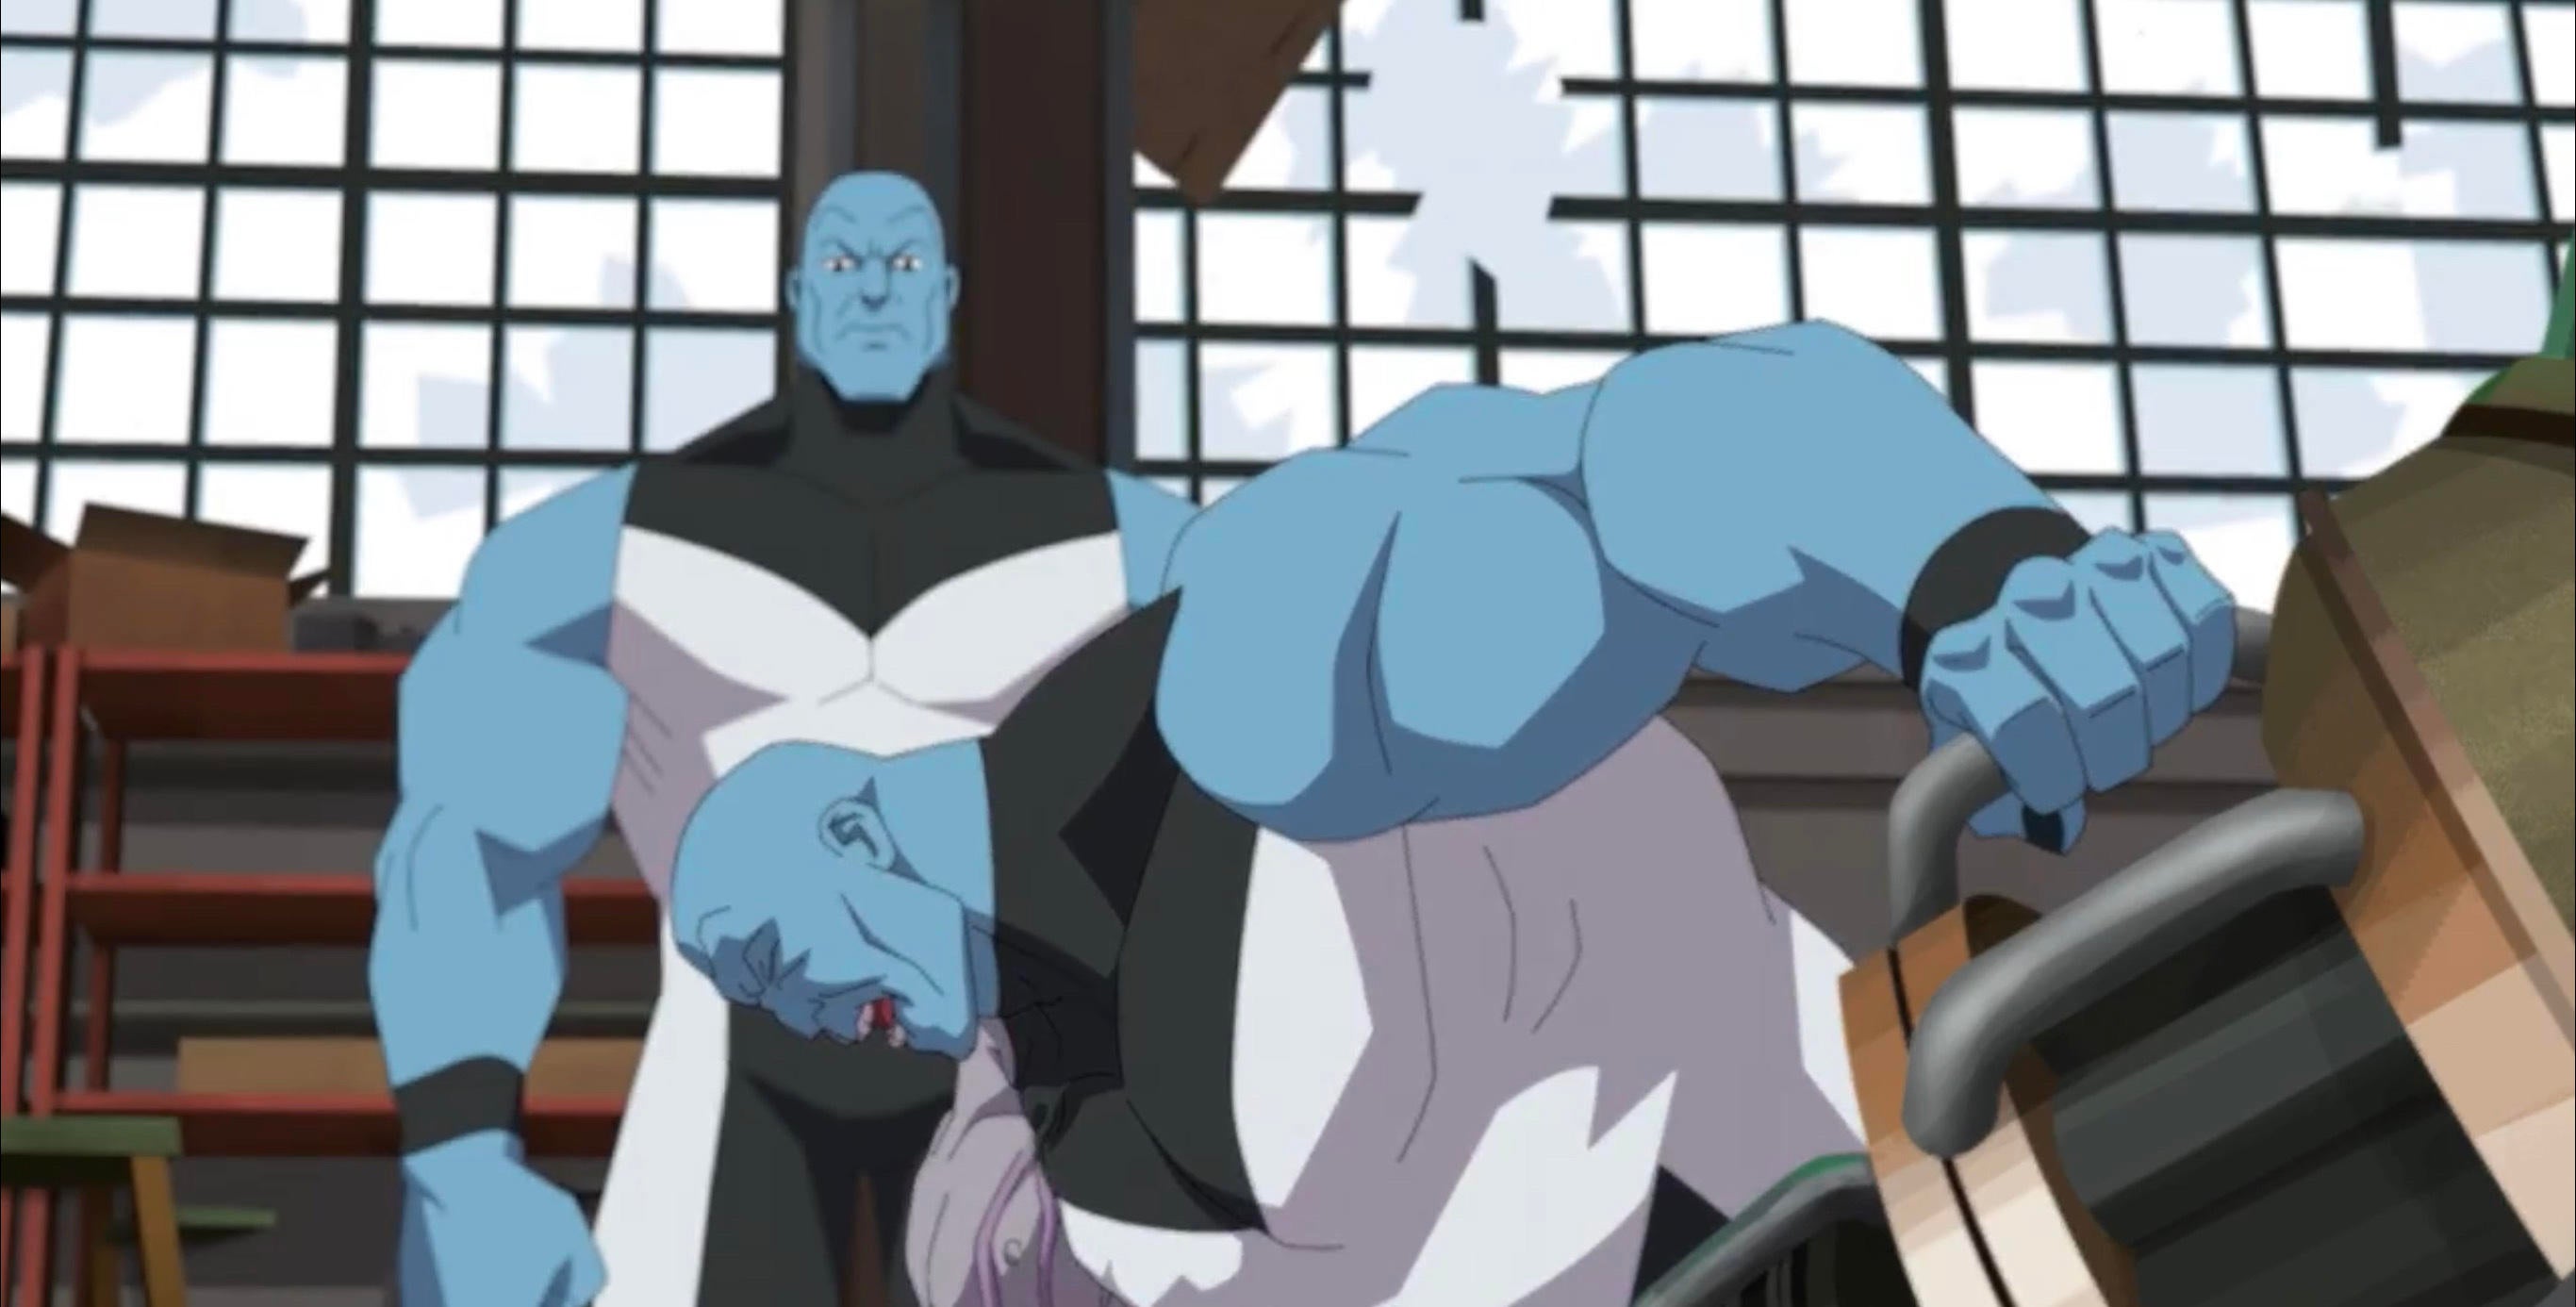 Invincible Season 2, Episode 4 Review – “It's Been a While”